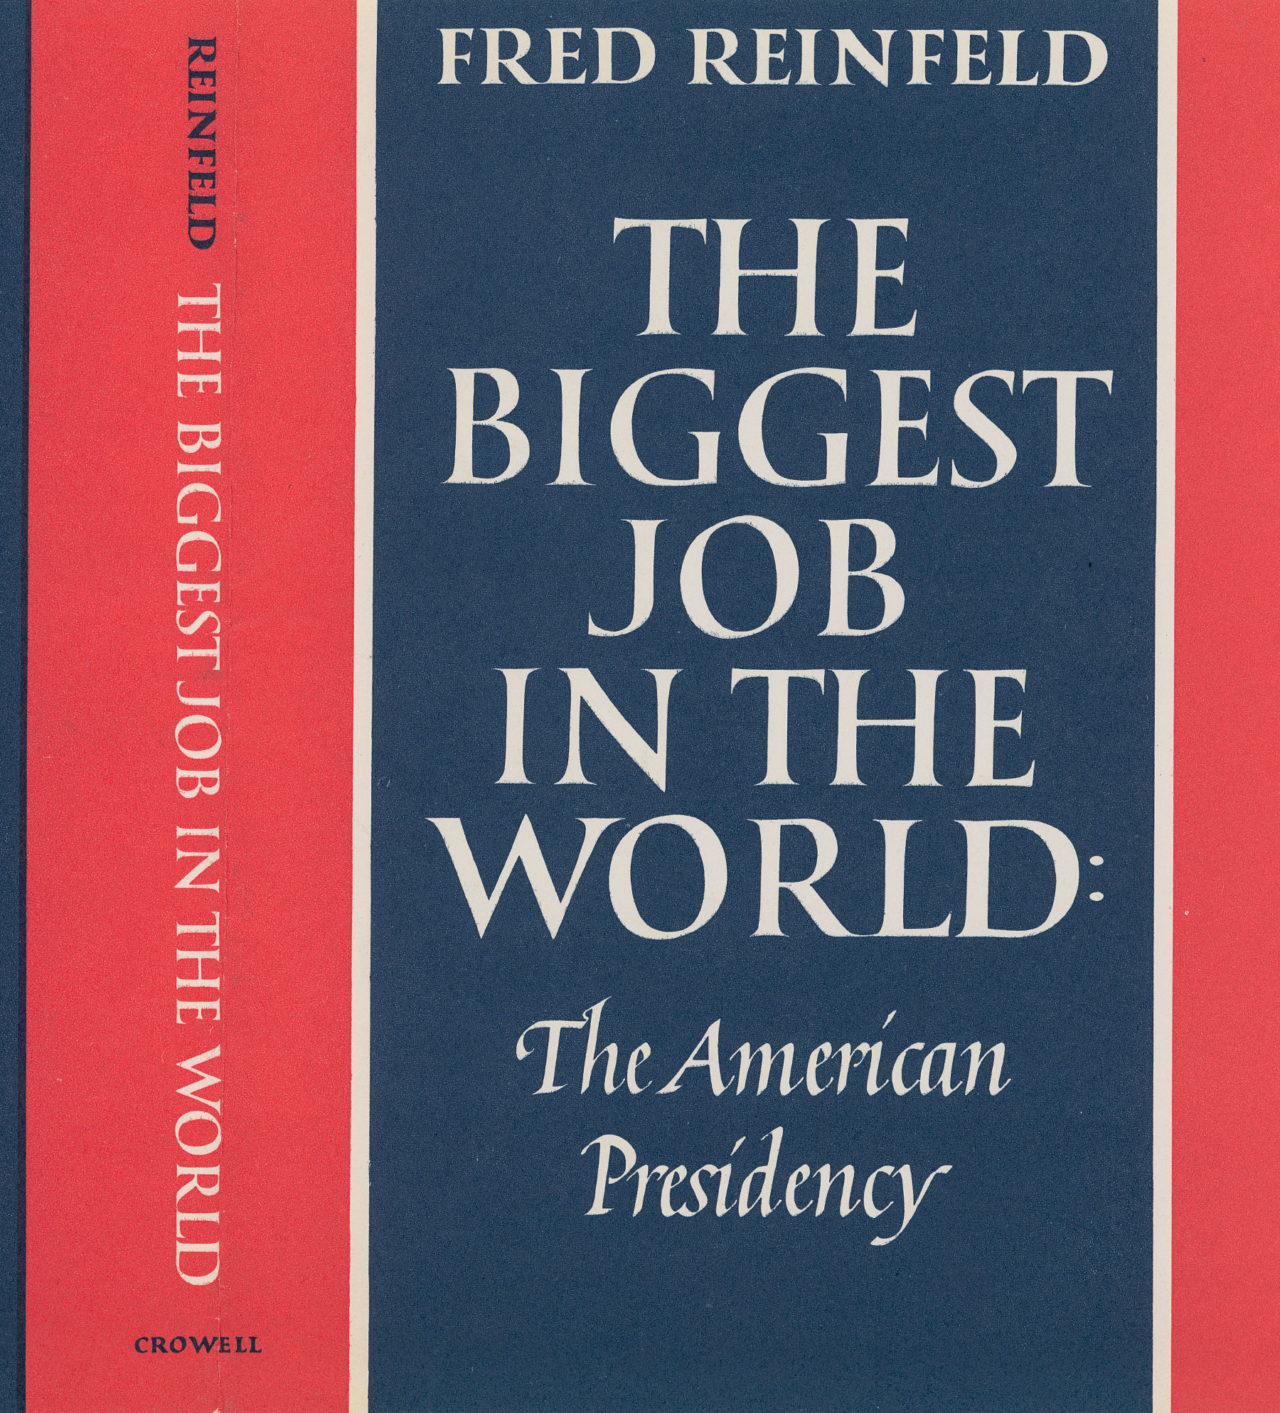 The Biggest Job in the World